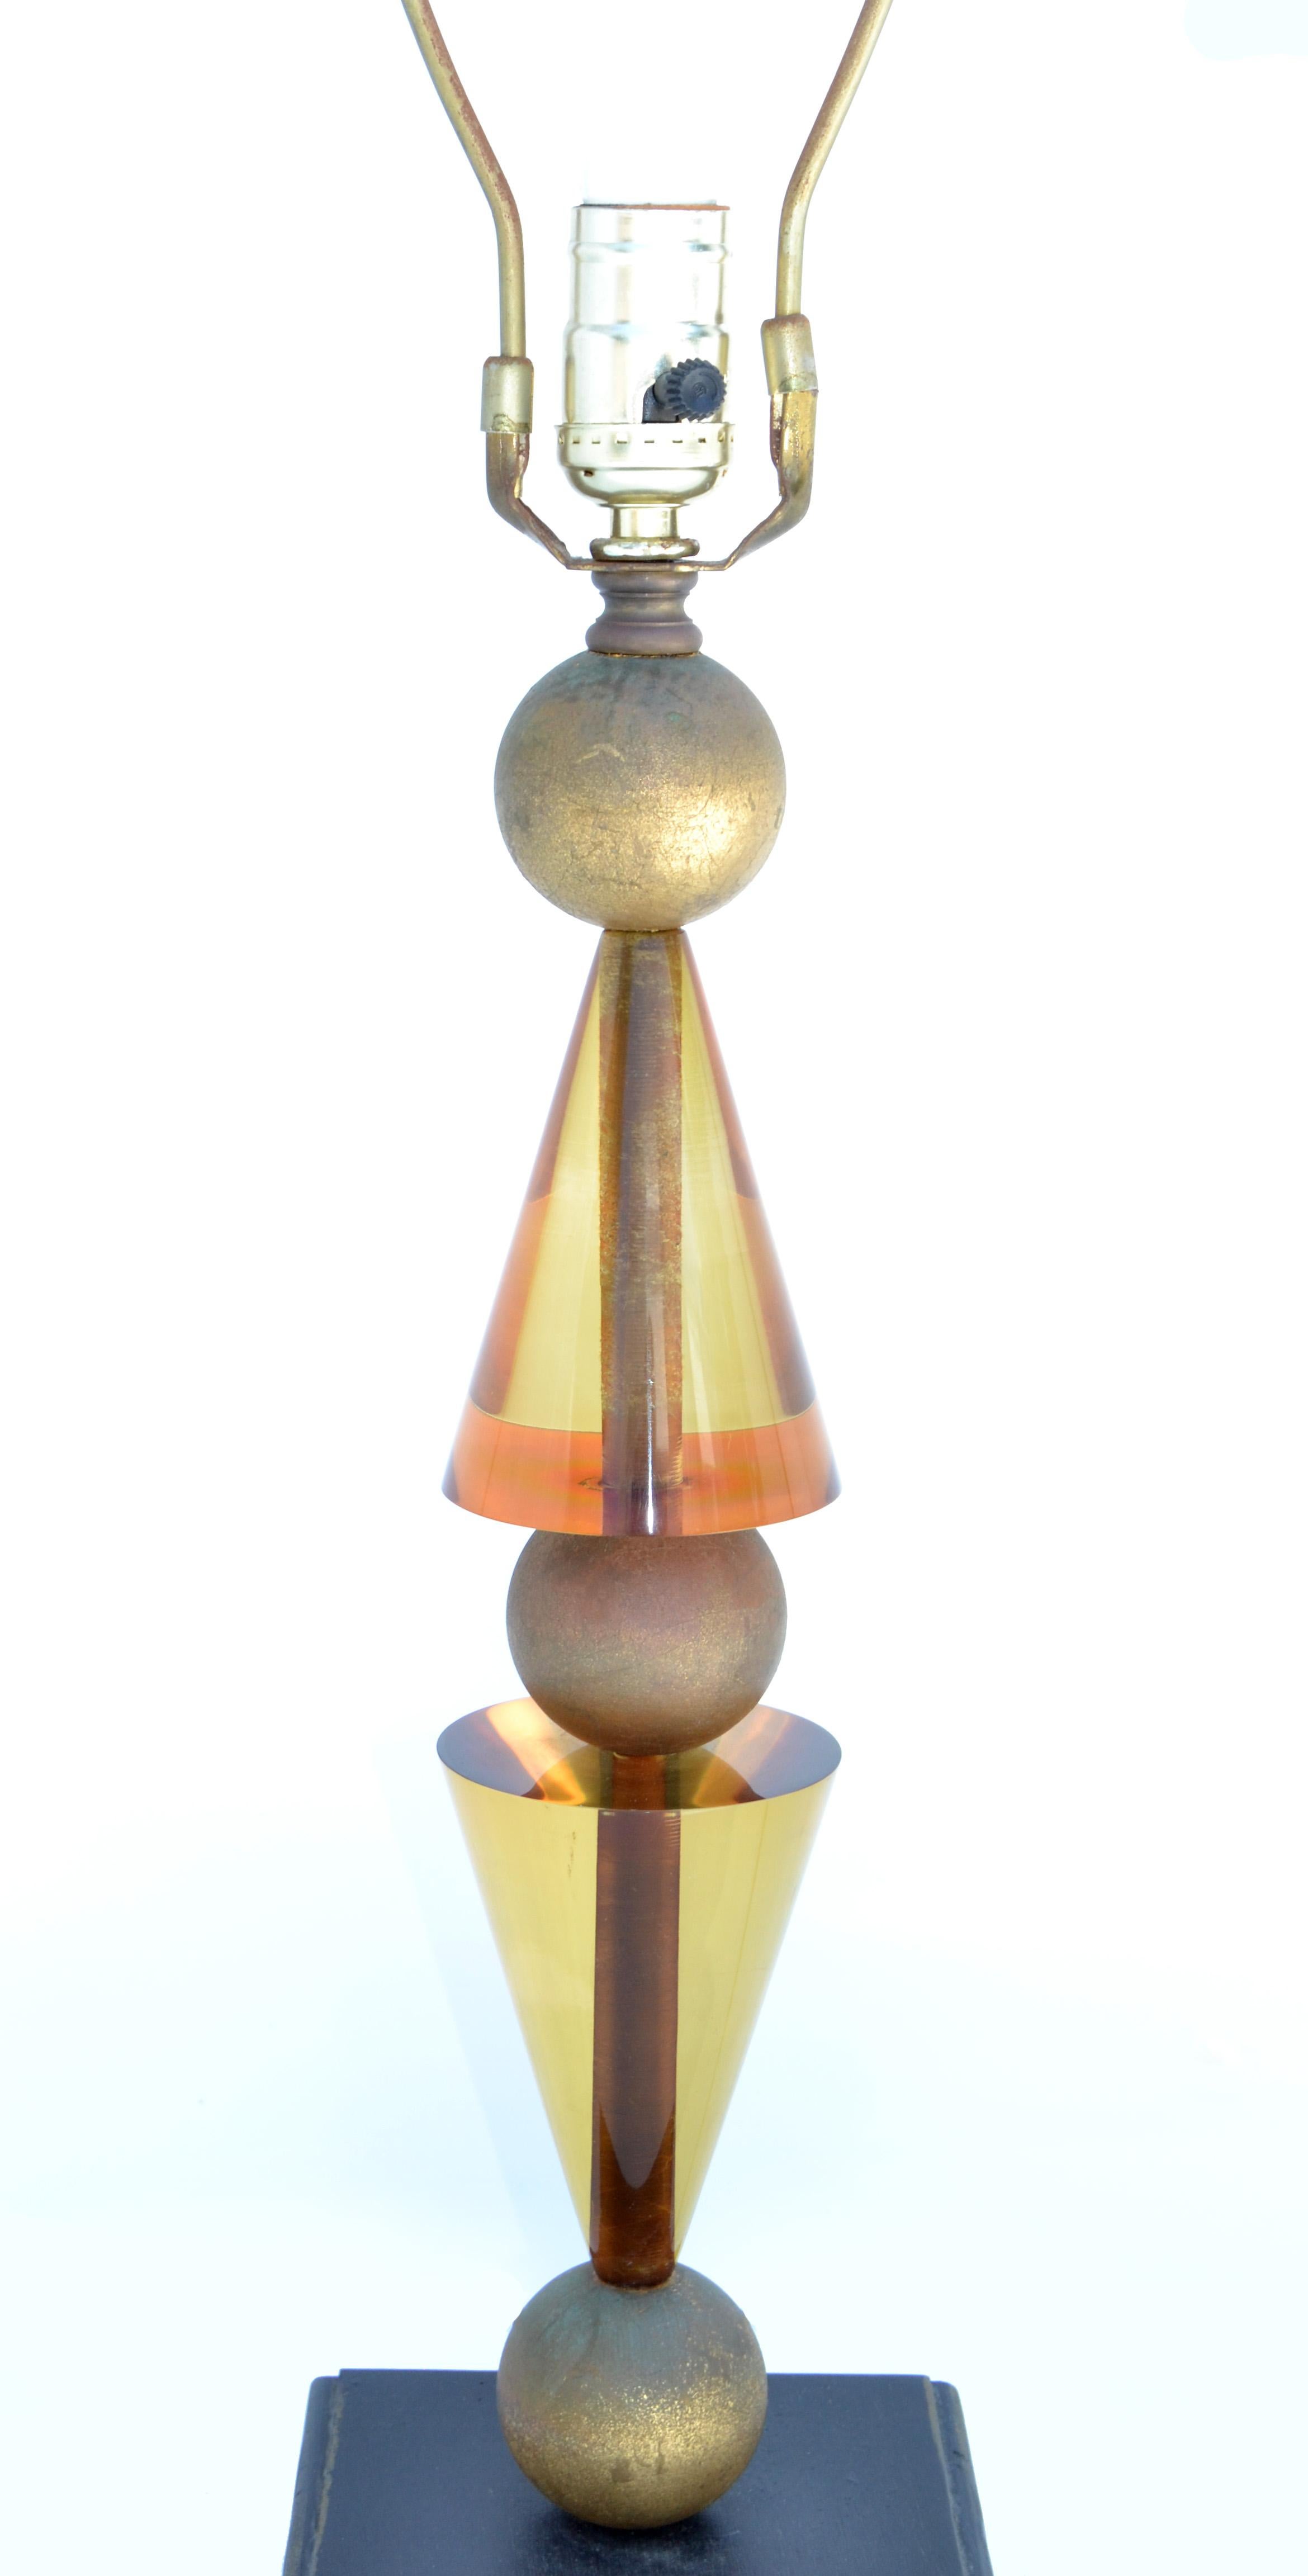 Hivo Van Teal Table Lamp Amber Gold Lucite & Wood Original Shade Midcentury 1979 In Good Condition For Sale In Miami, FL